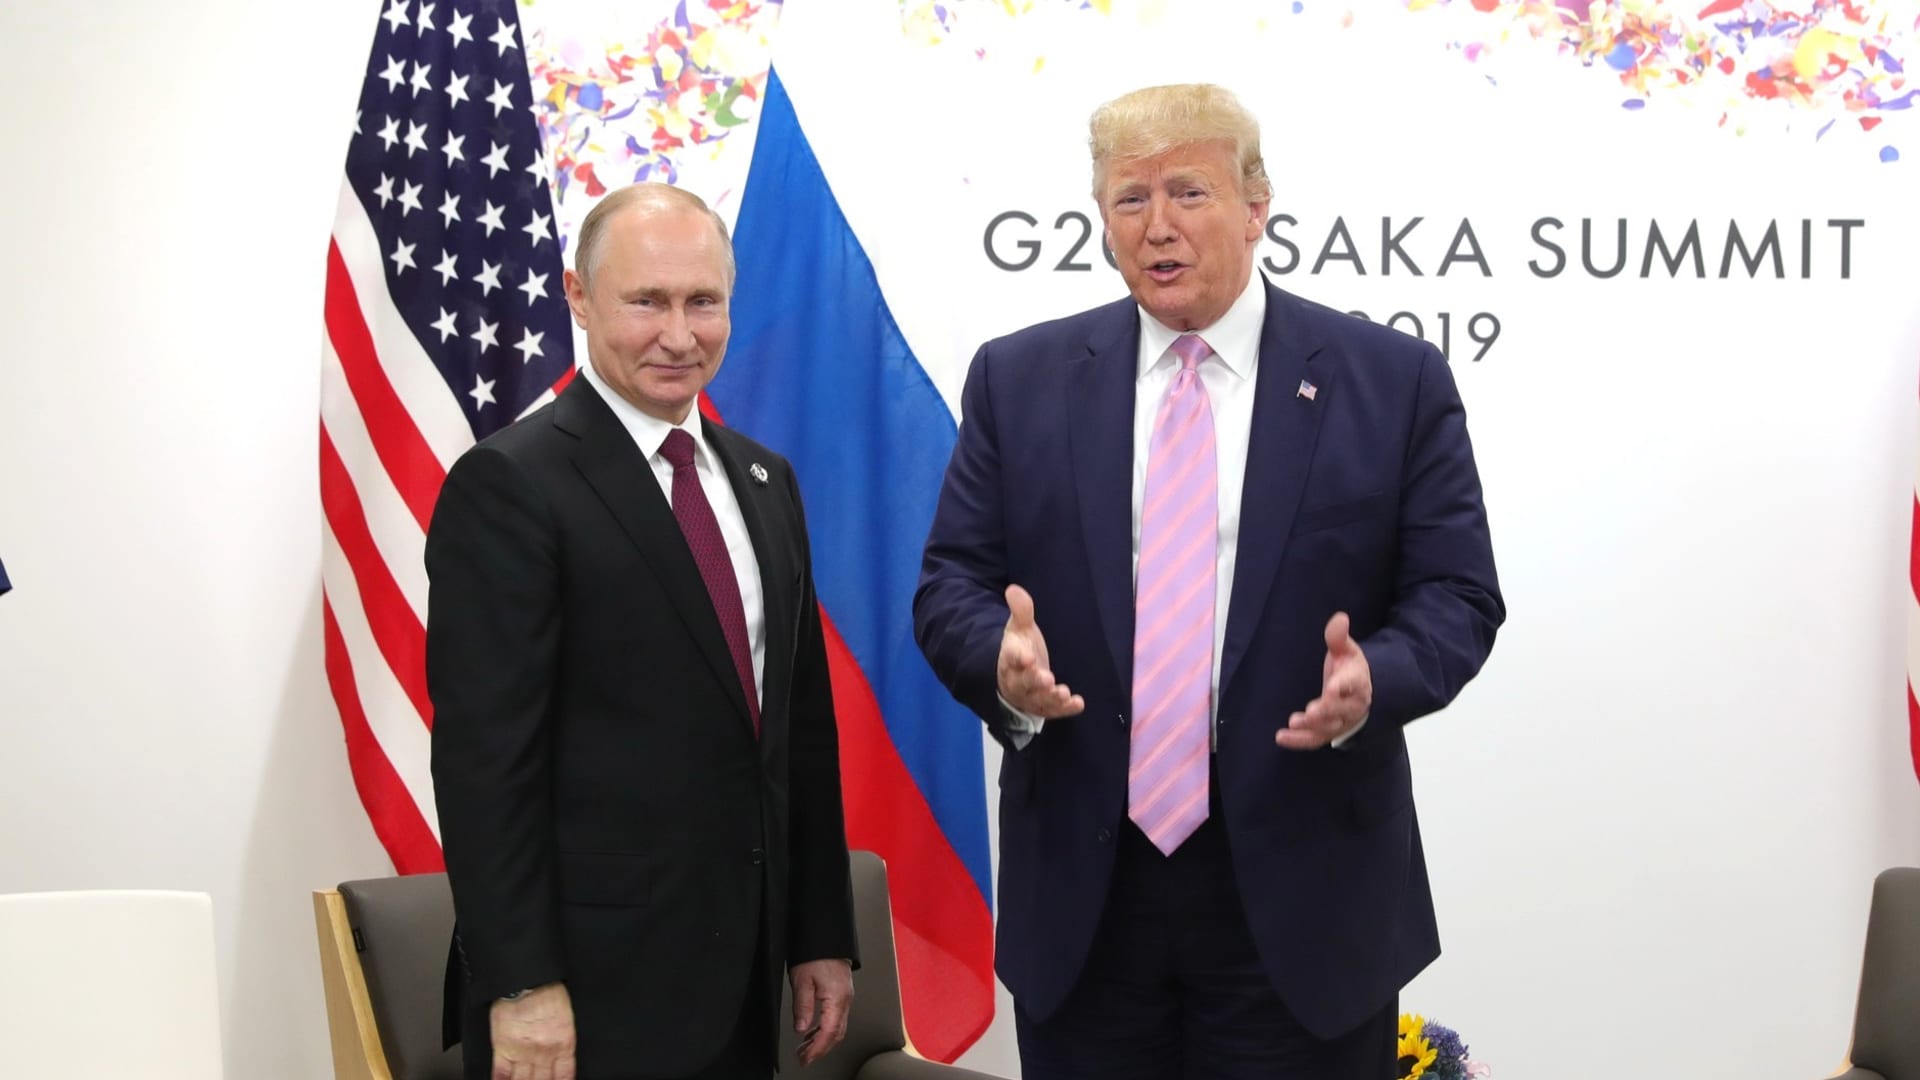 US President Donald Trump meets Russian President Vladimir Putin on the first day of the G20 summit in Osaka, Japan on June 28, 2019.